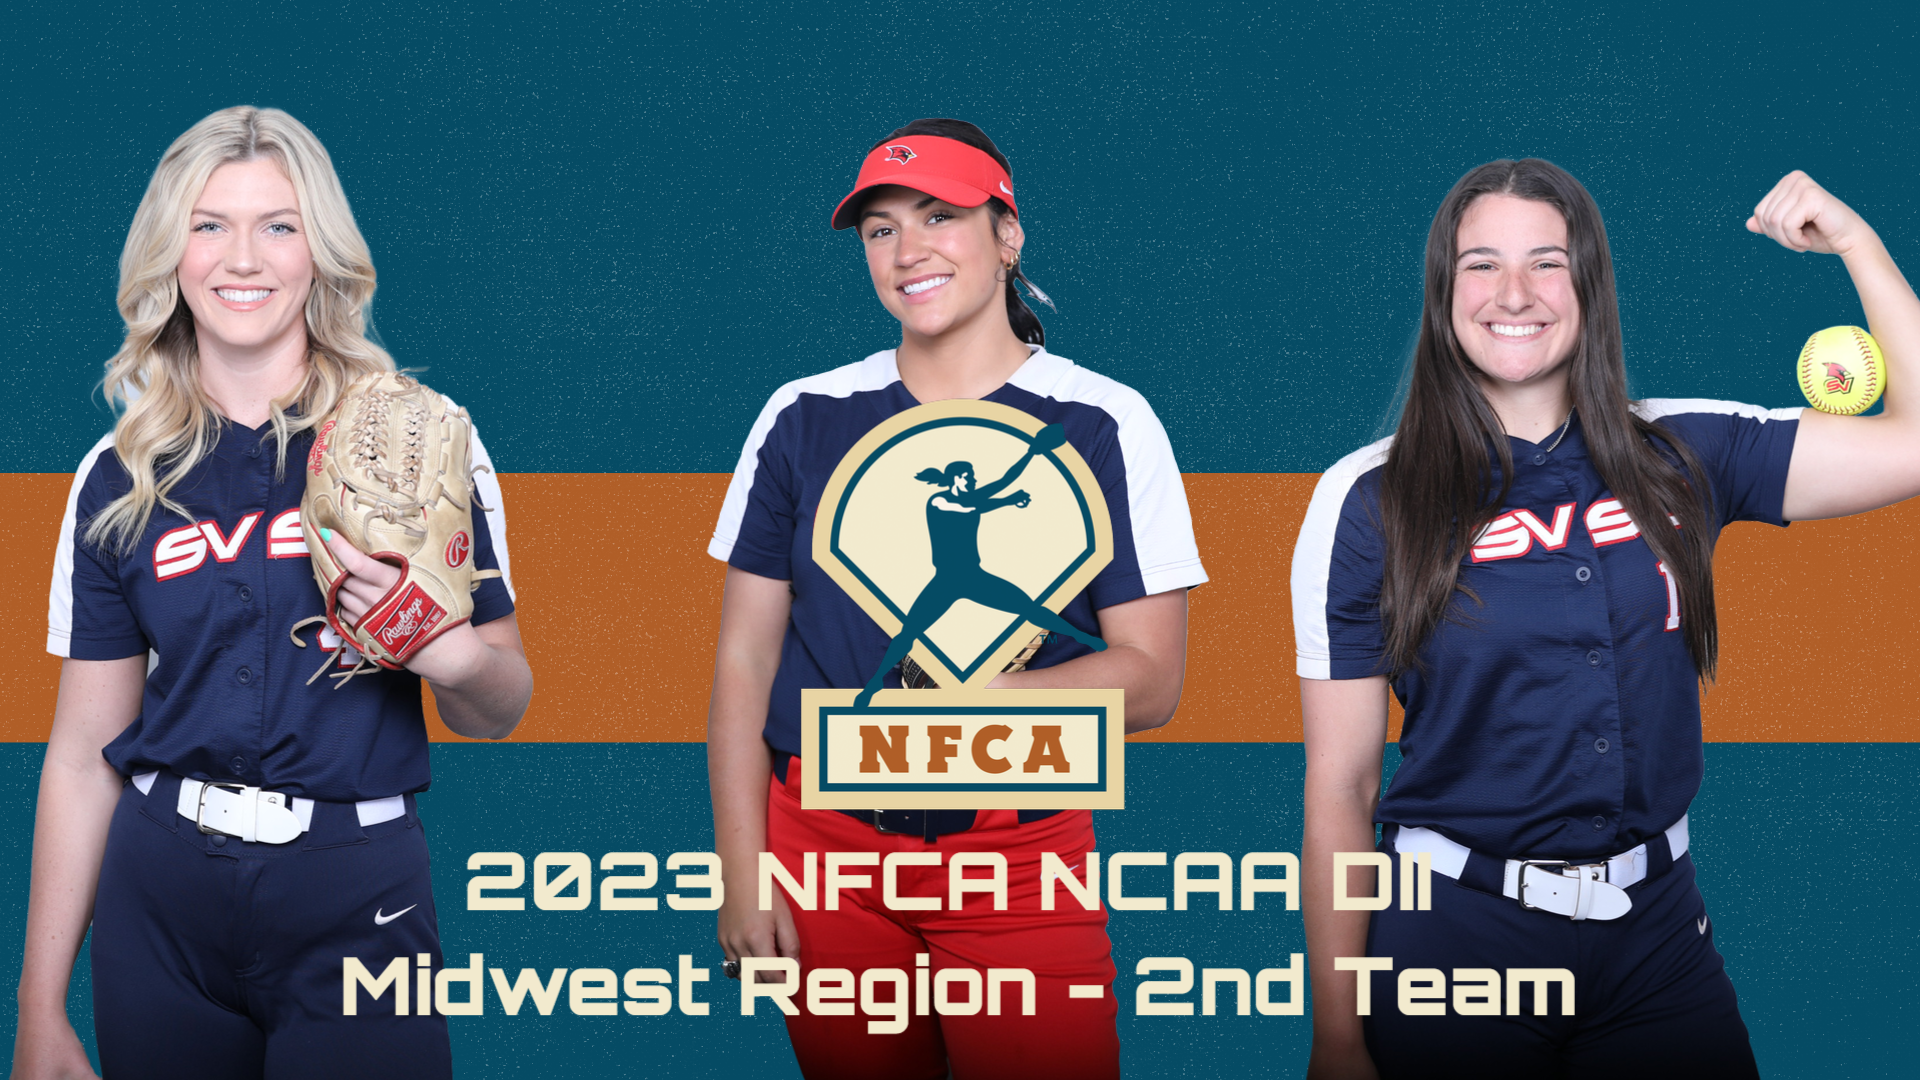 Depew, Gills, and Popko Named NFCA Midwest Region Second Team